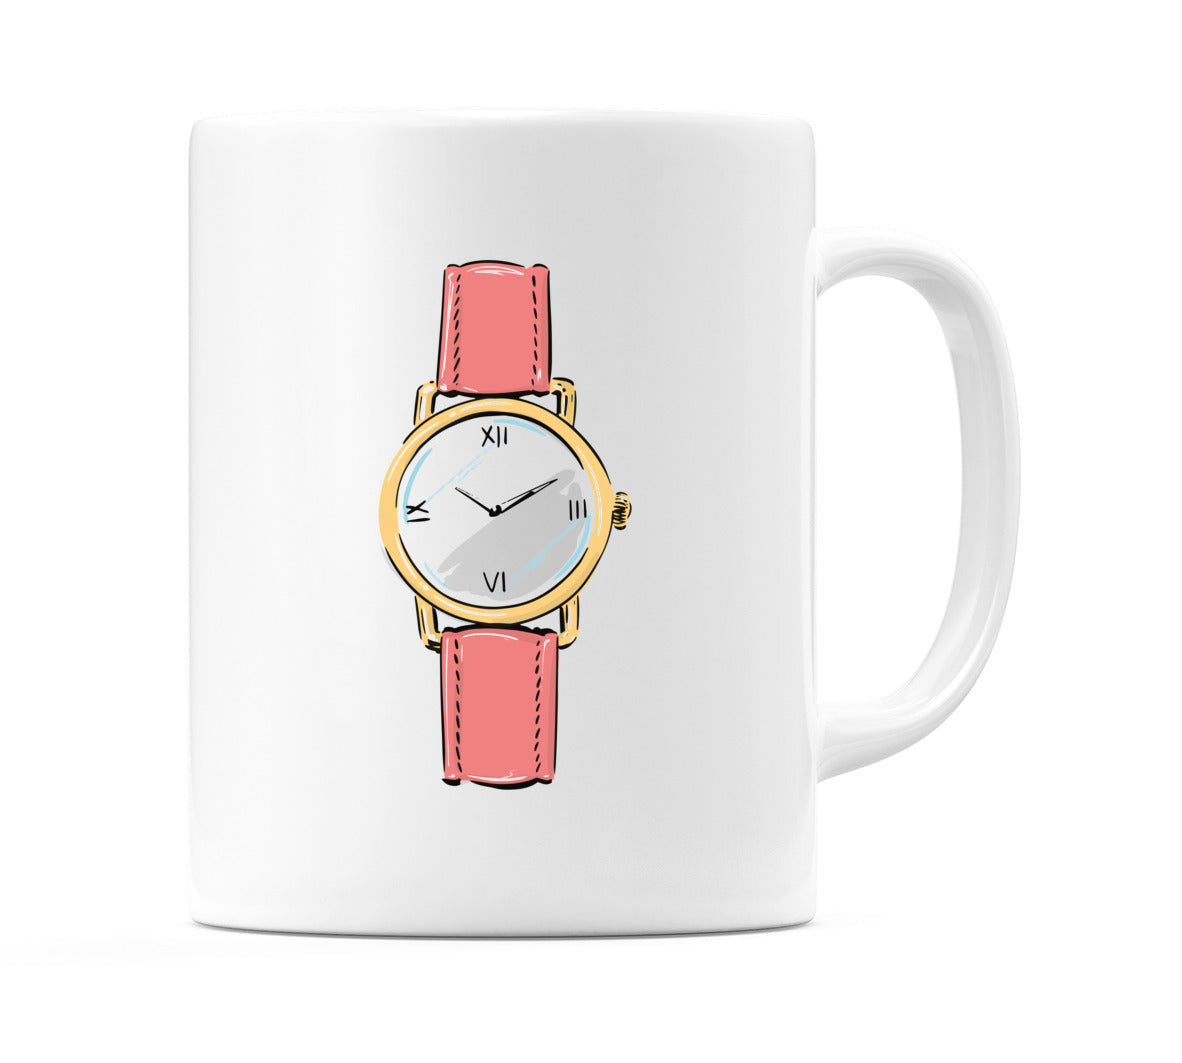 Gold Bezelled Clock Watch with Ruby Red Strap Mug